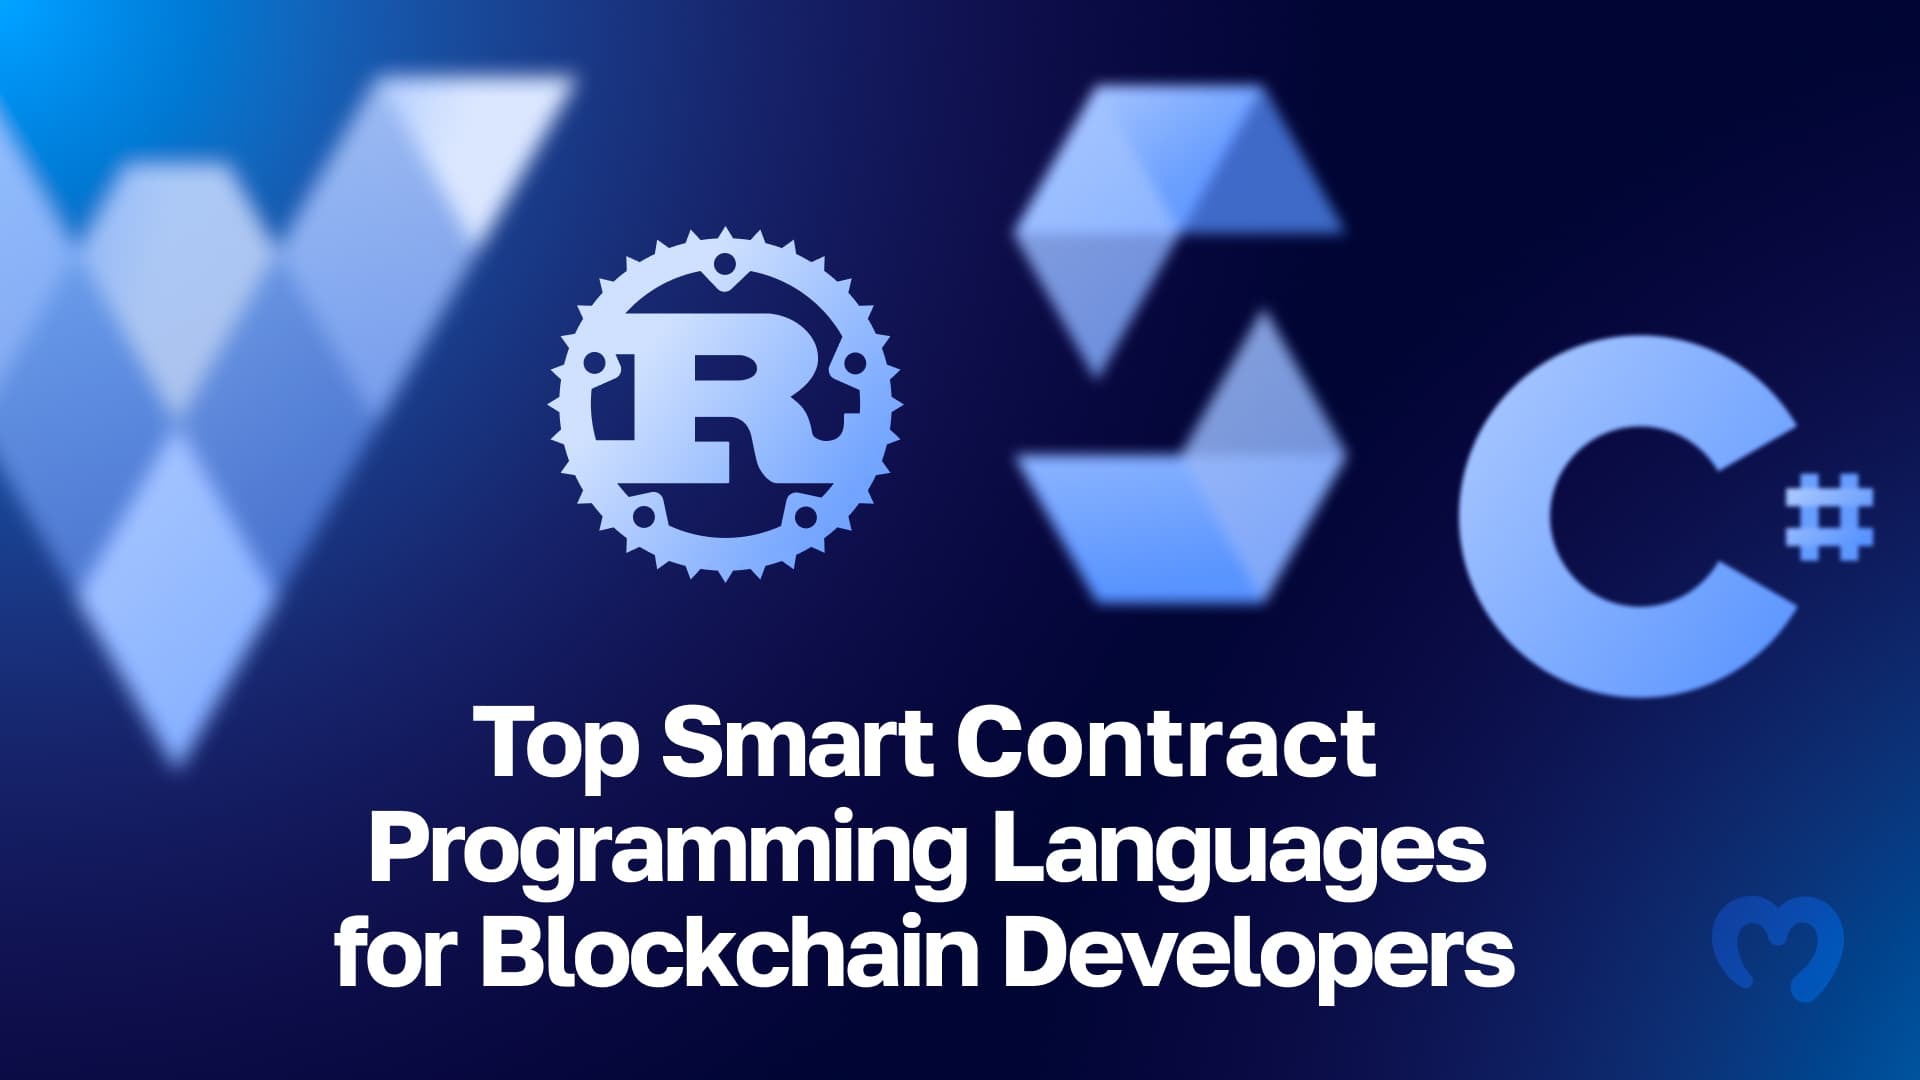 Top Smart Contract Programming Languages for Blockchain Developers